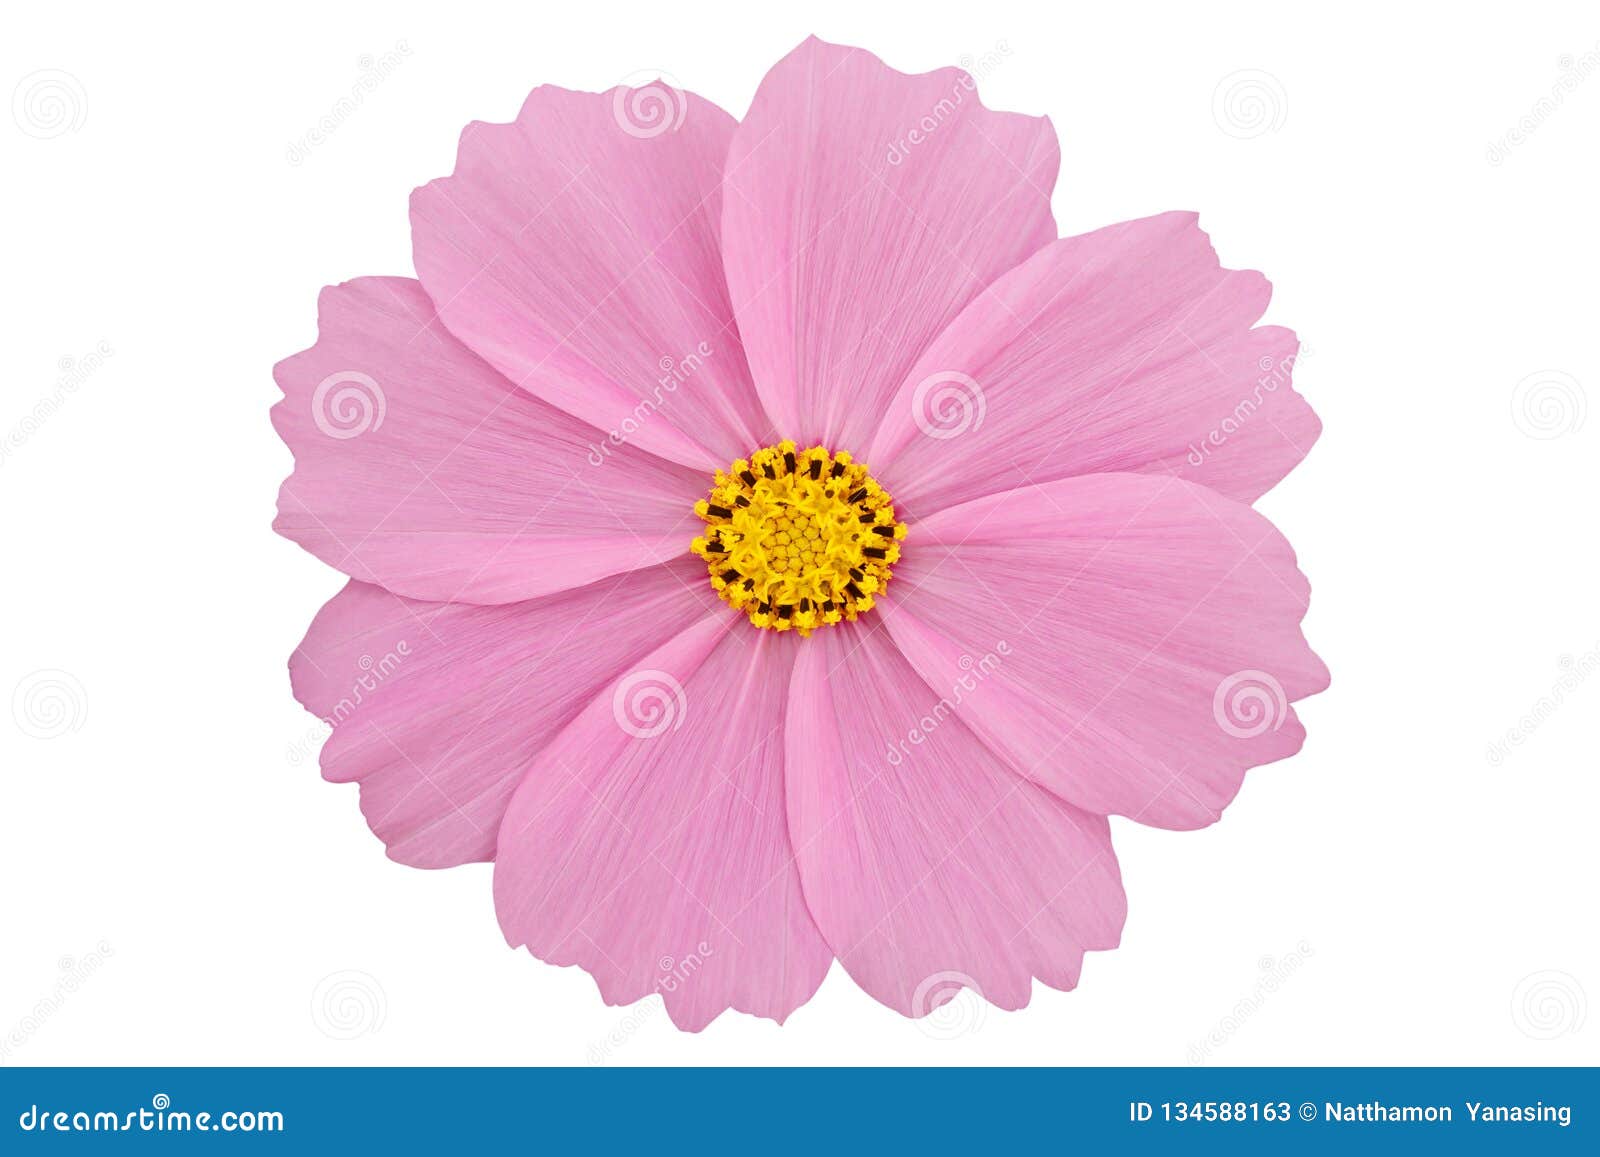 beautiful pink cosmos flower  on white background with clipping path